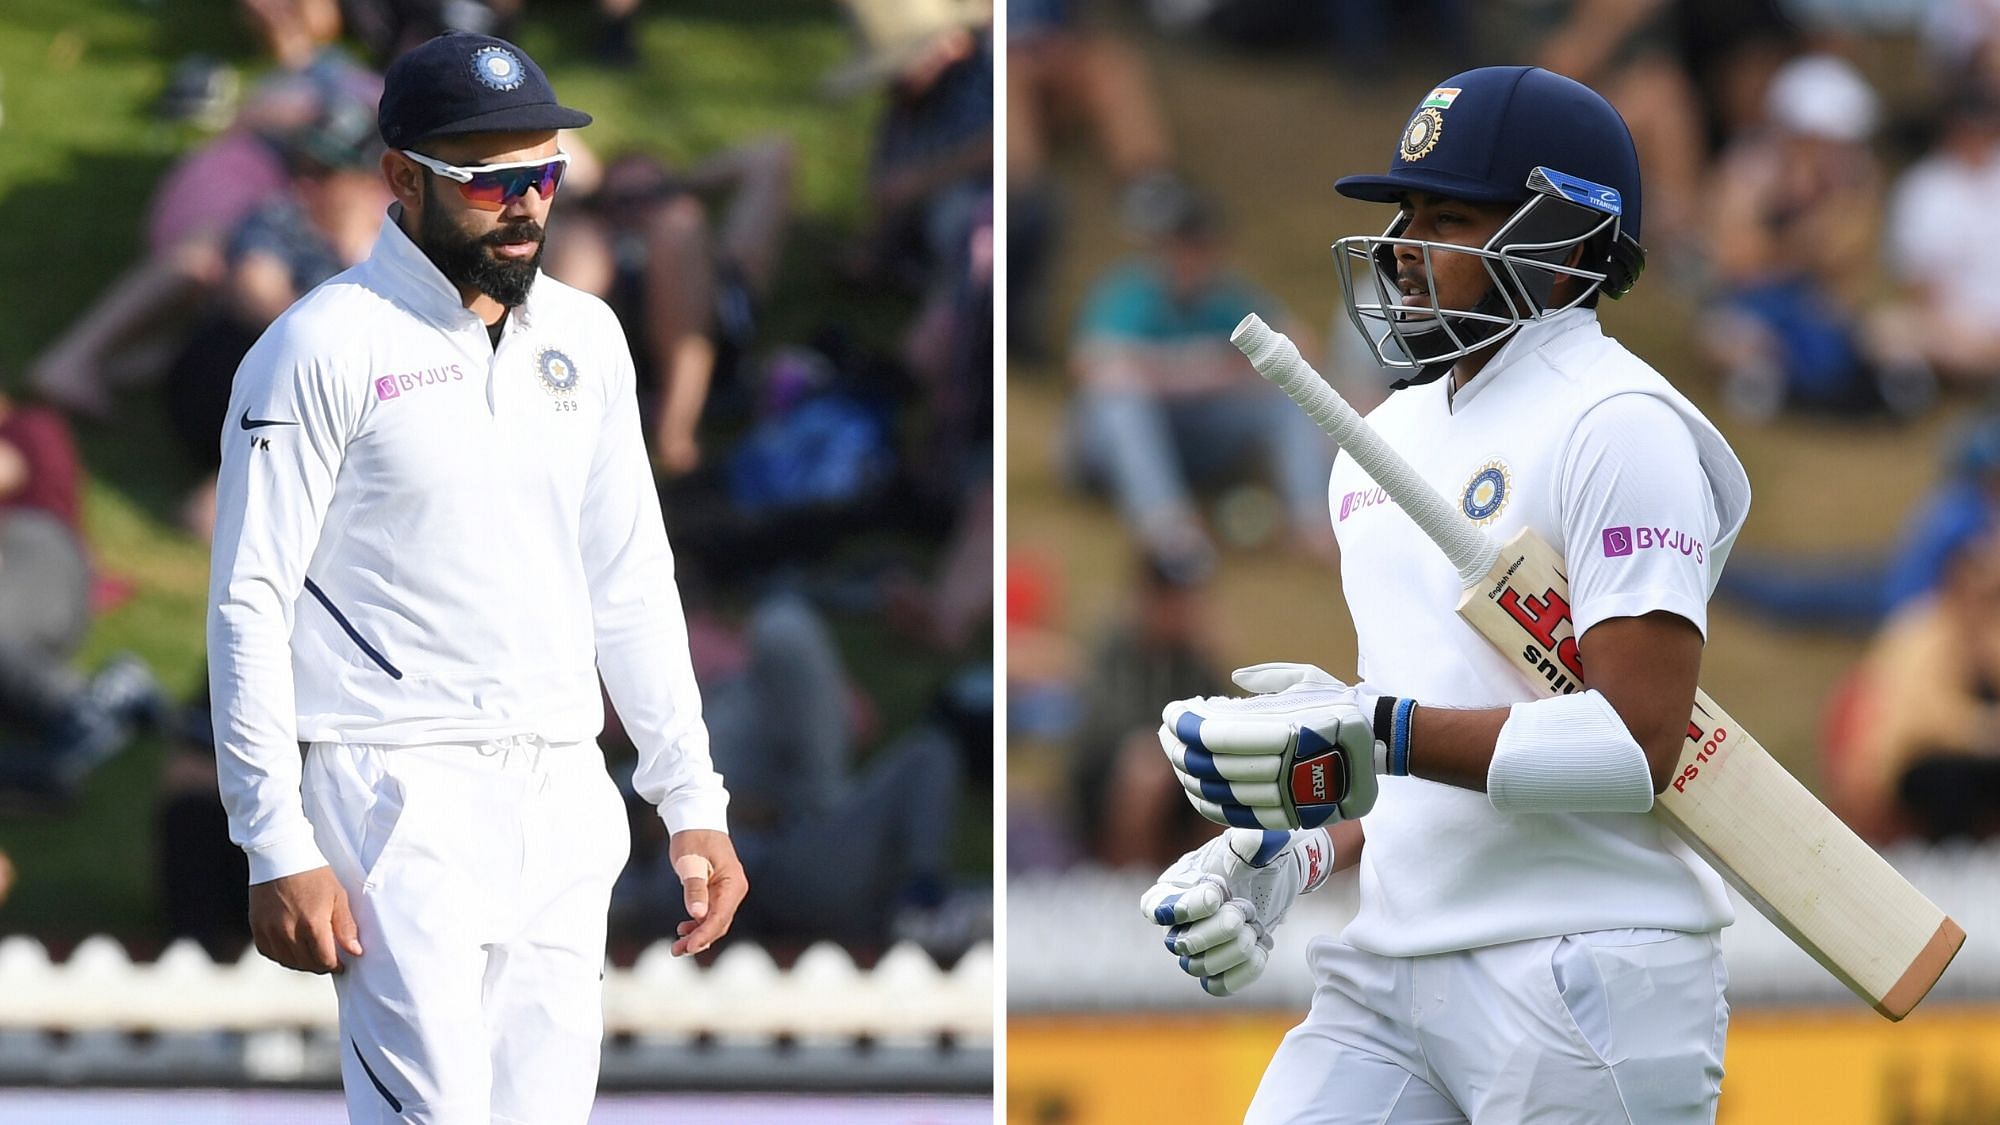 Prithvi Shaw scored 16 and 14 in the two innings of the first Test against New Zealand in Wellington, which India lost by 10 wickets.